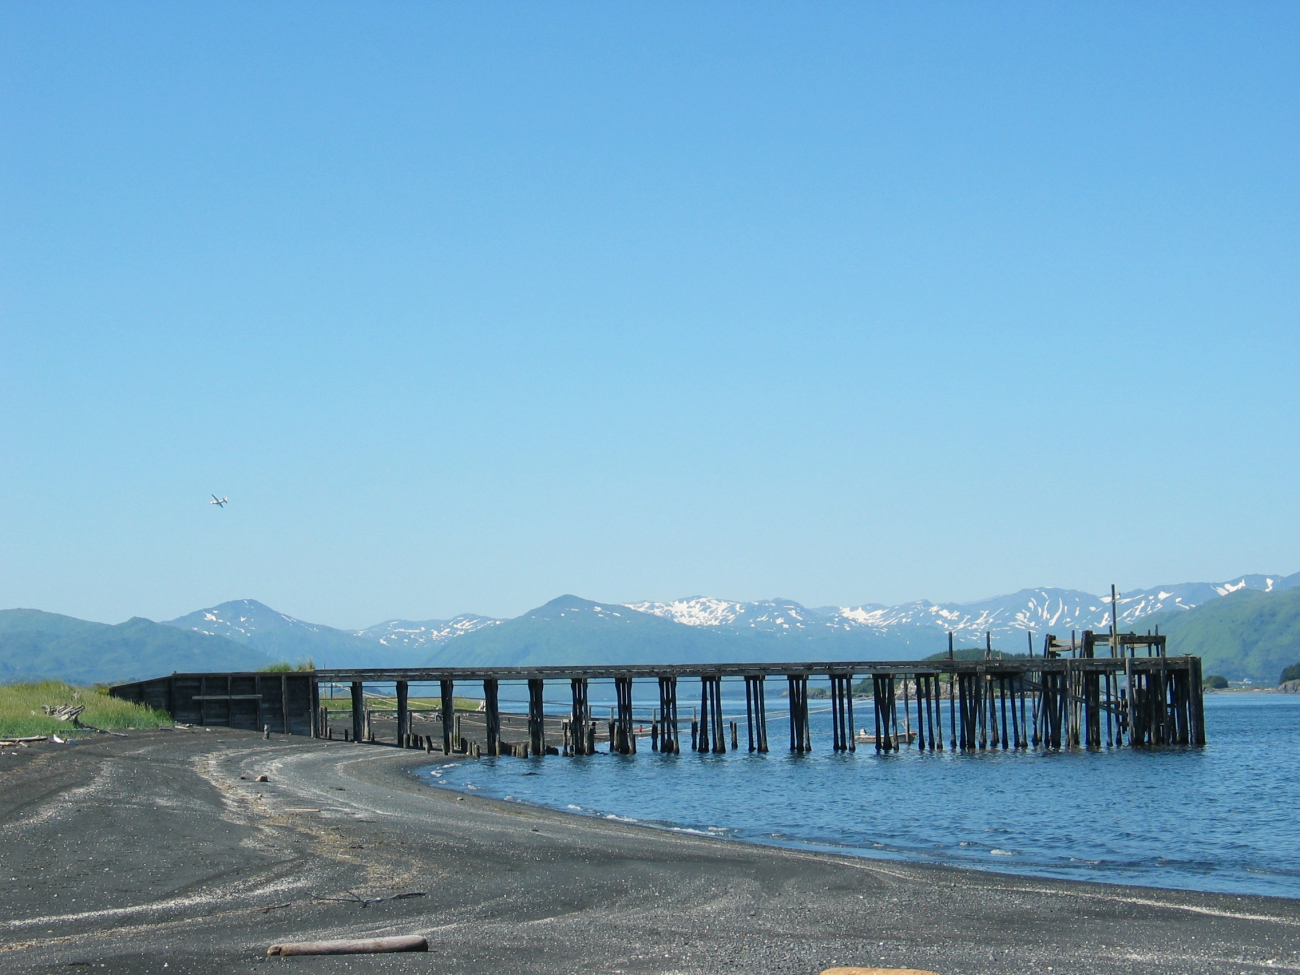 Black sand and cobble beach on Kodiak Island with pier at low tide